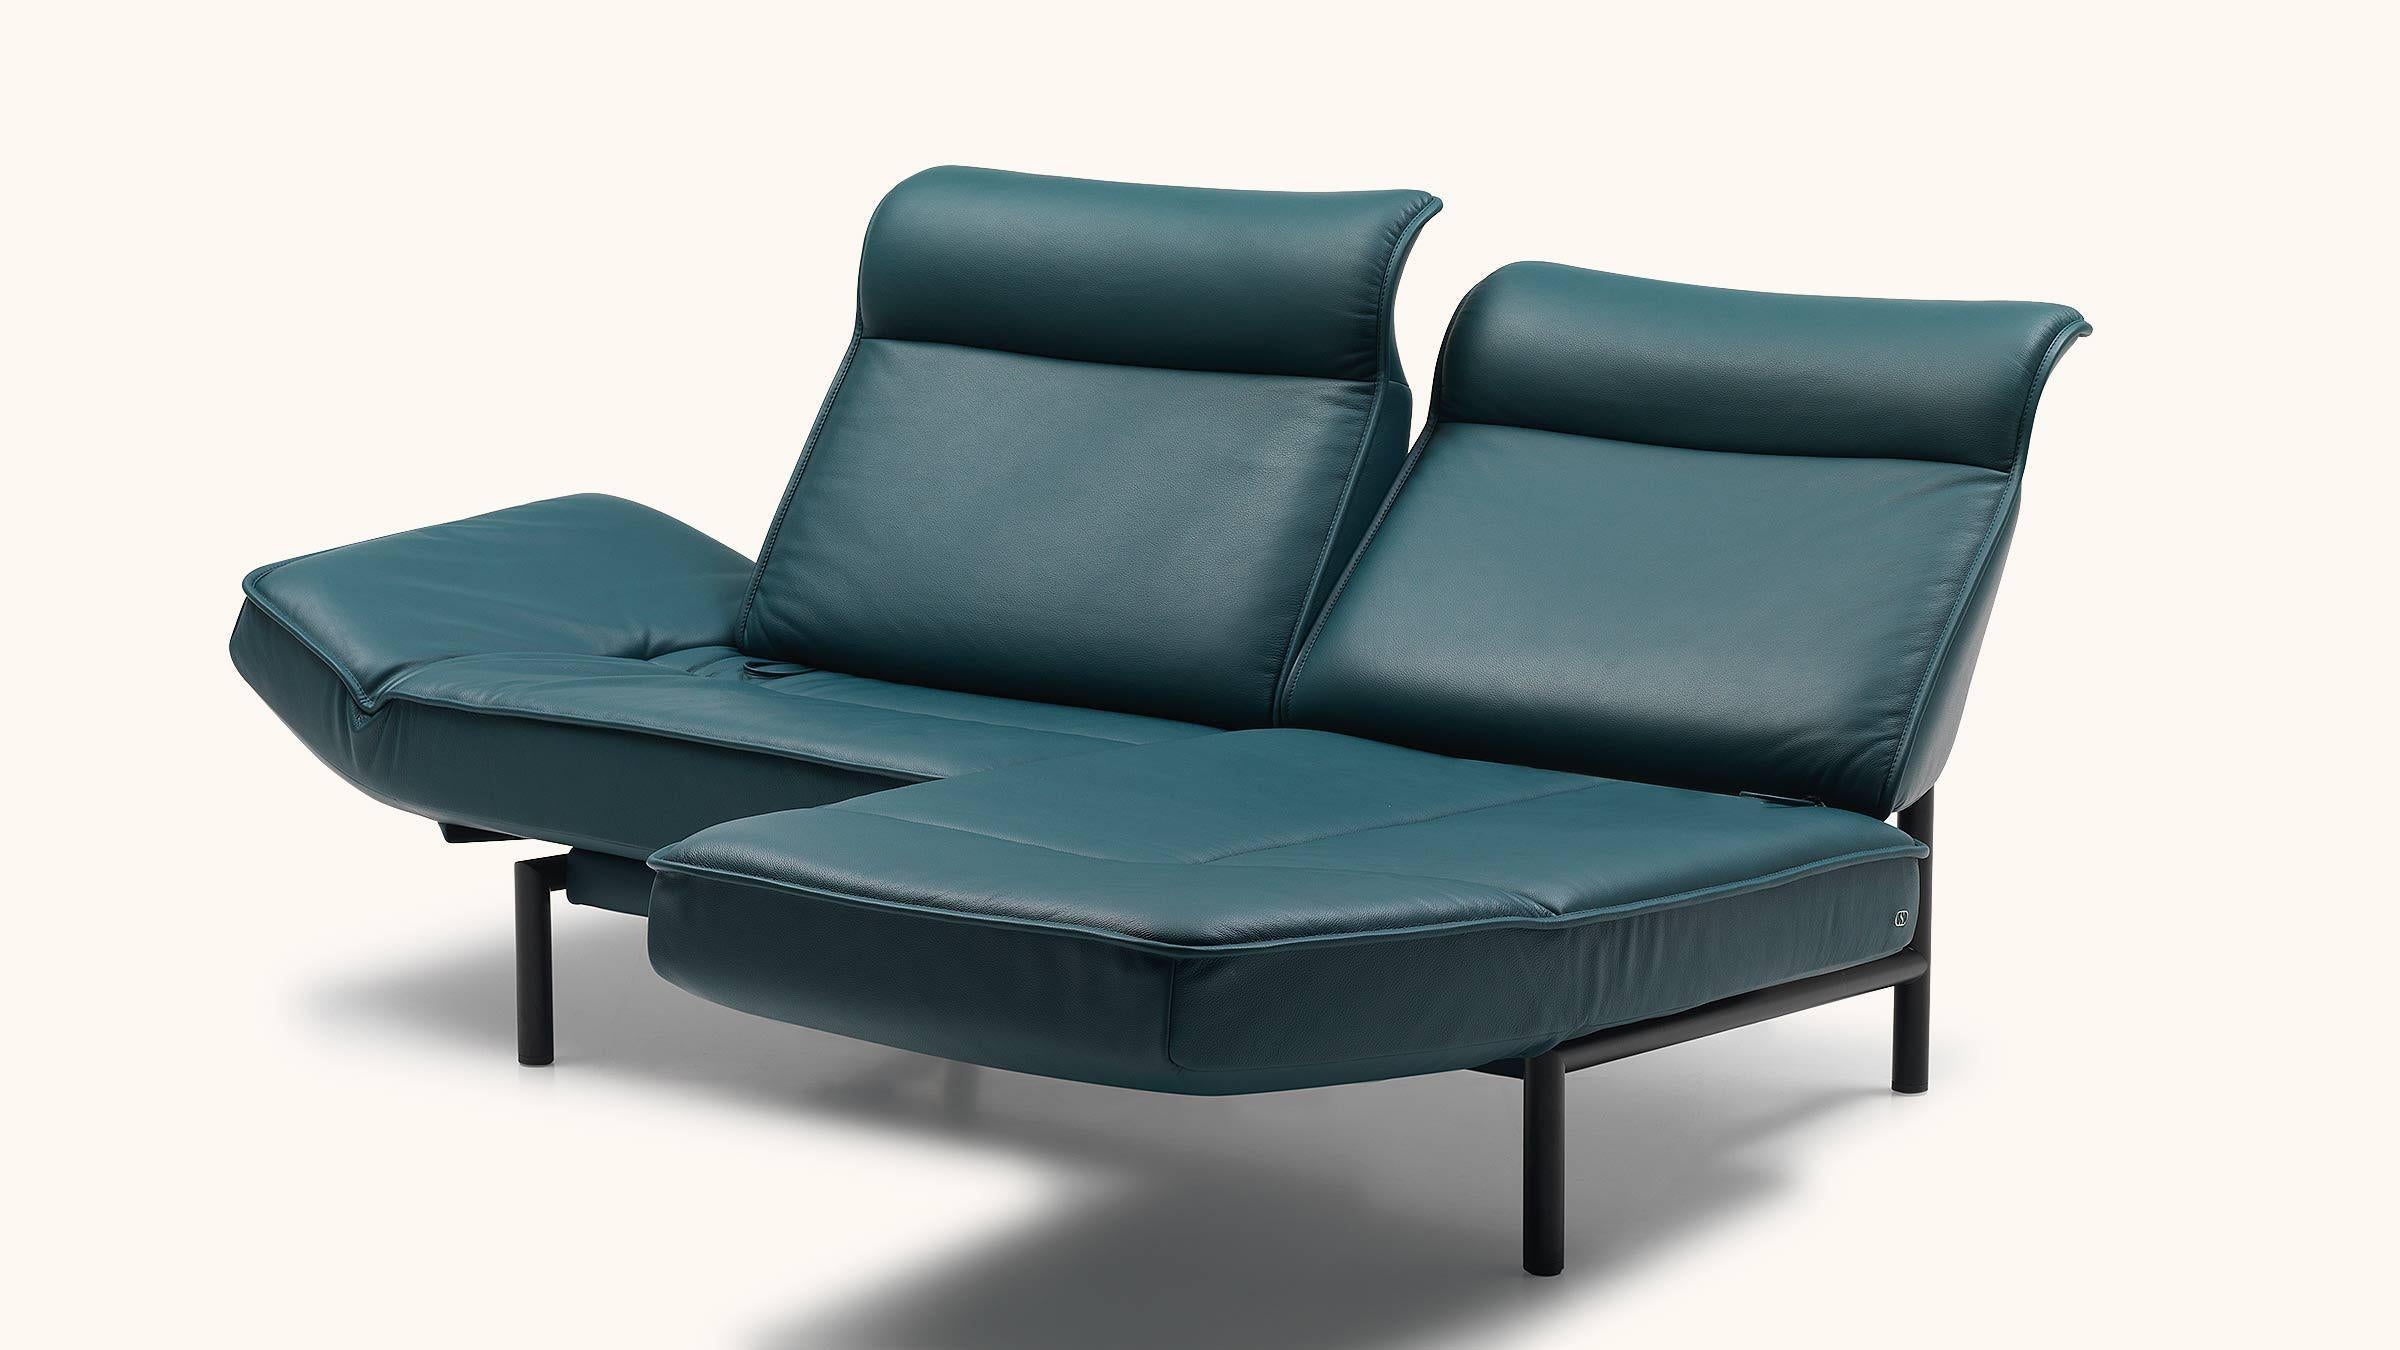 De Sede DS-450/02 Sofa in Petrol Upholstery by Thomas Althaus In New Condition For Sale In Brooklyn, NY